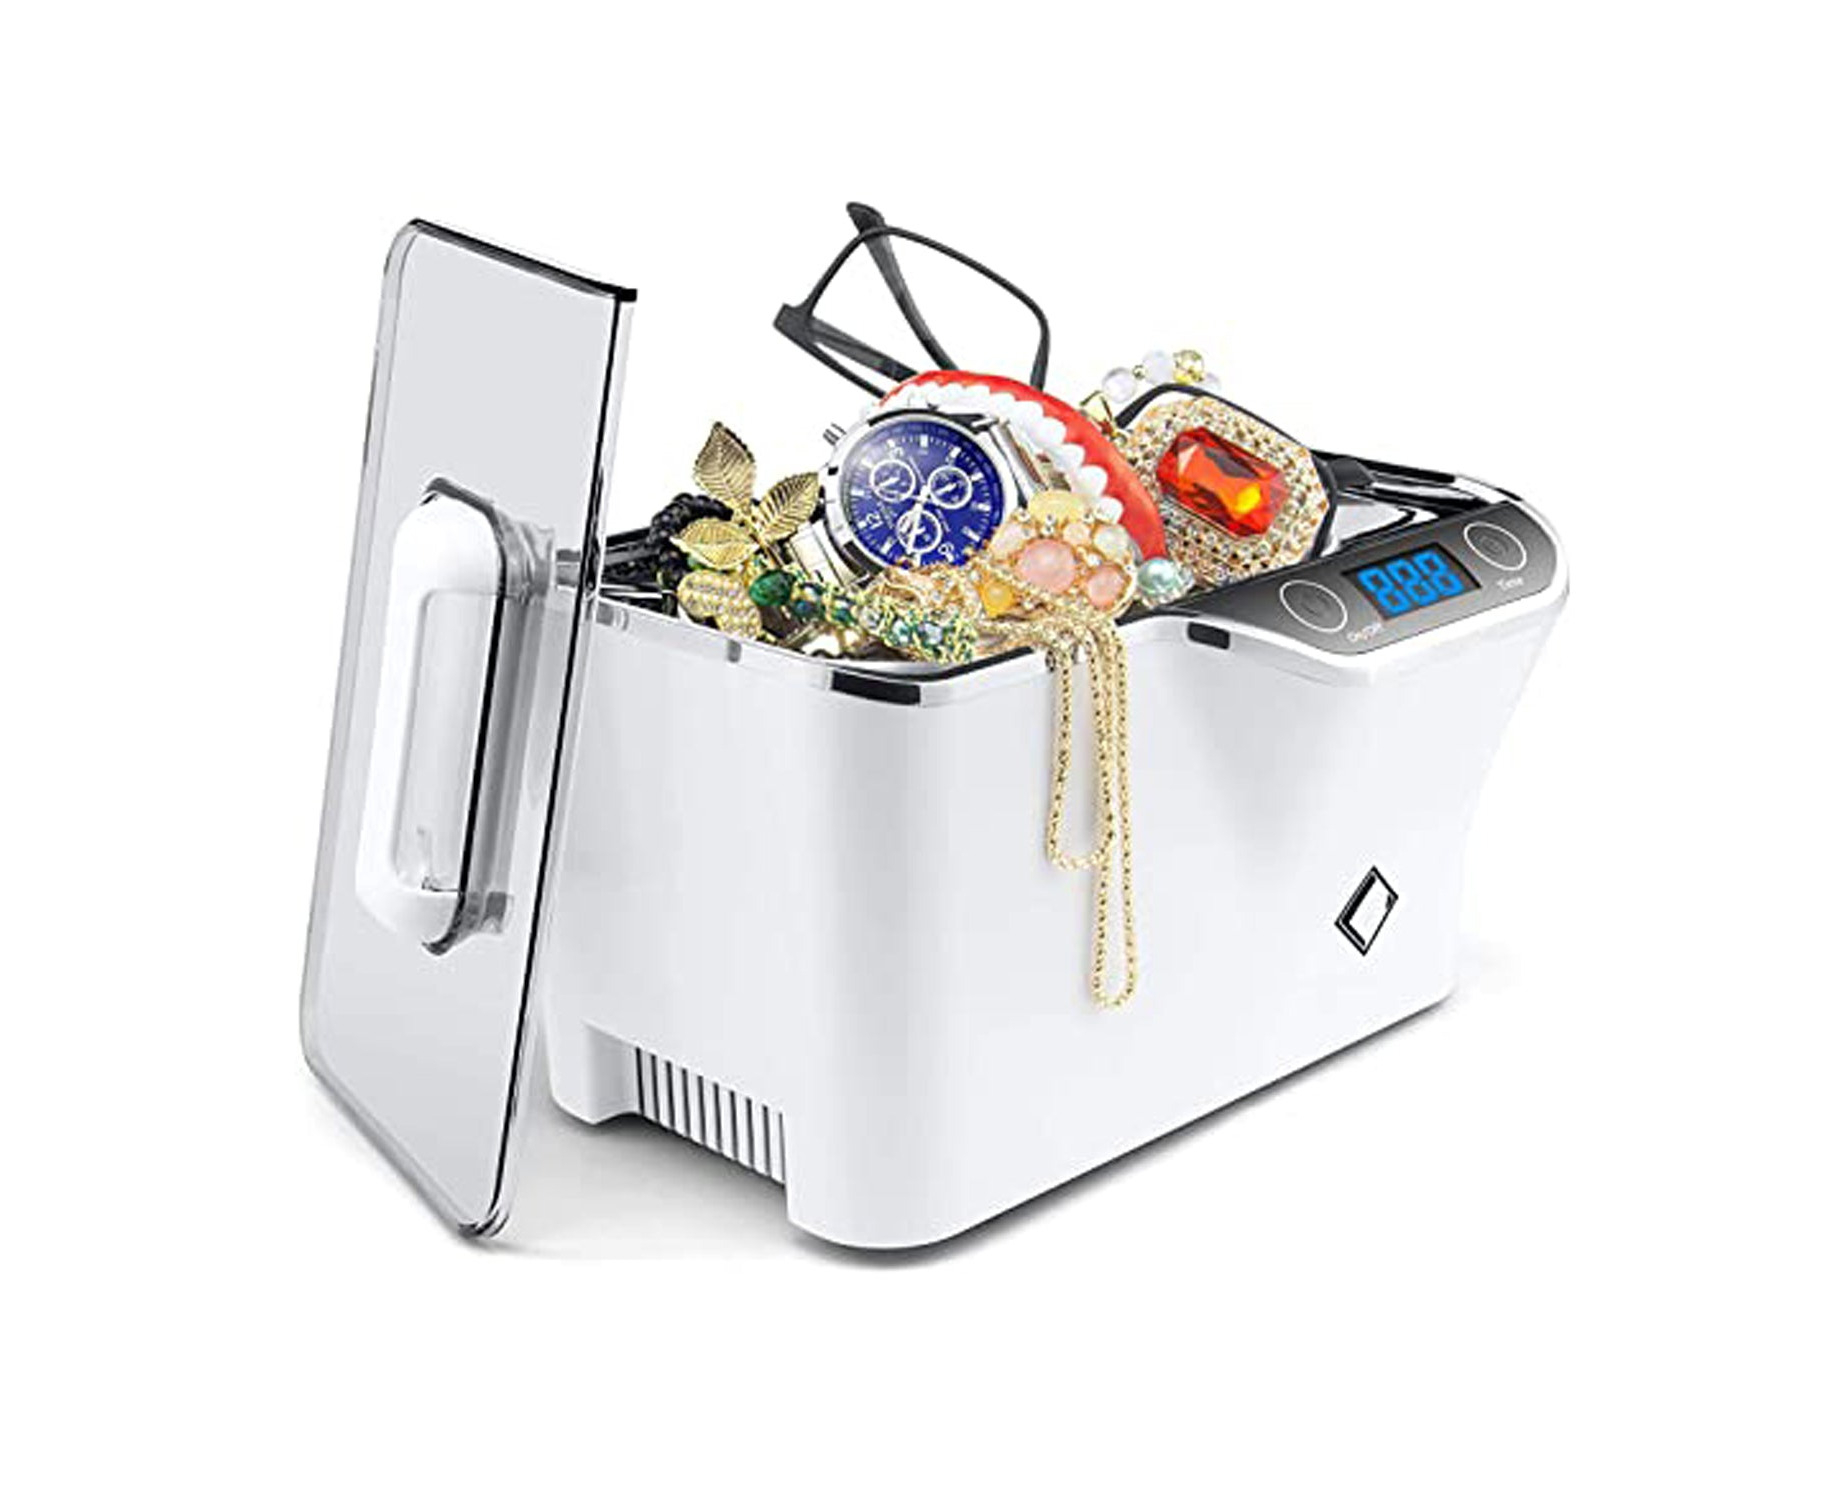 LifeBasis Portable CDS-100 Ultrasonic Jewelry Cleaner 600ML With Touch